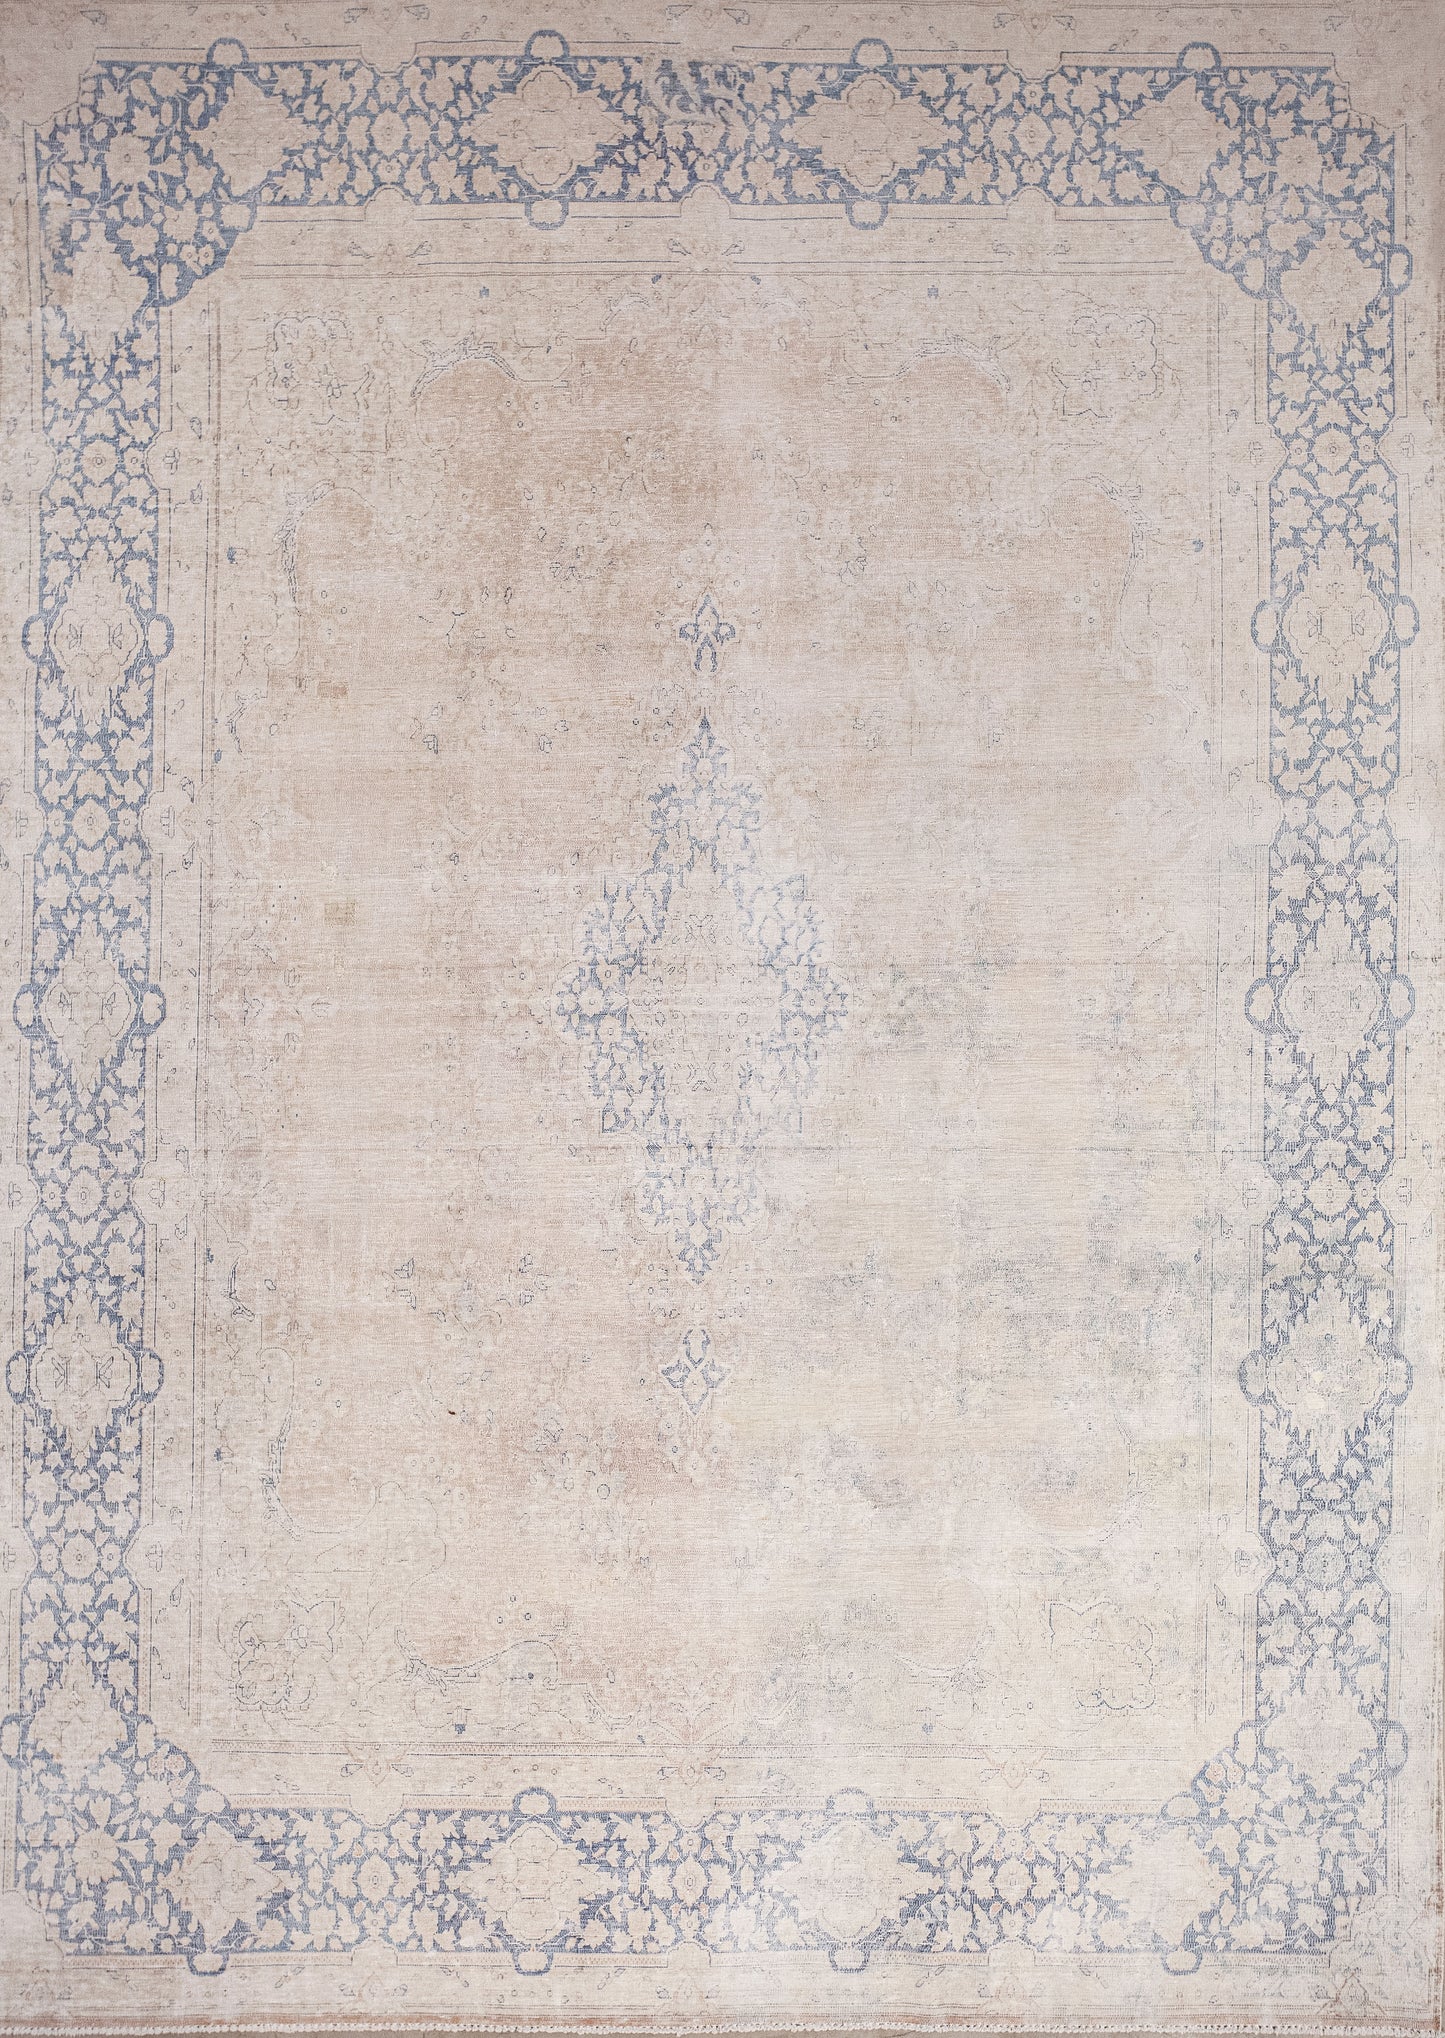 This humble rug was woven with vibes of respect and trust.